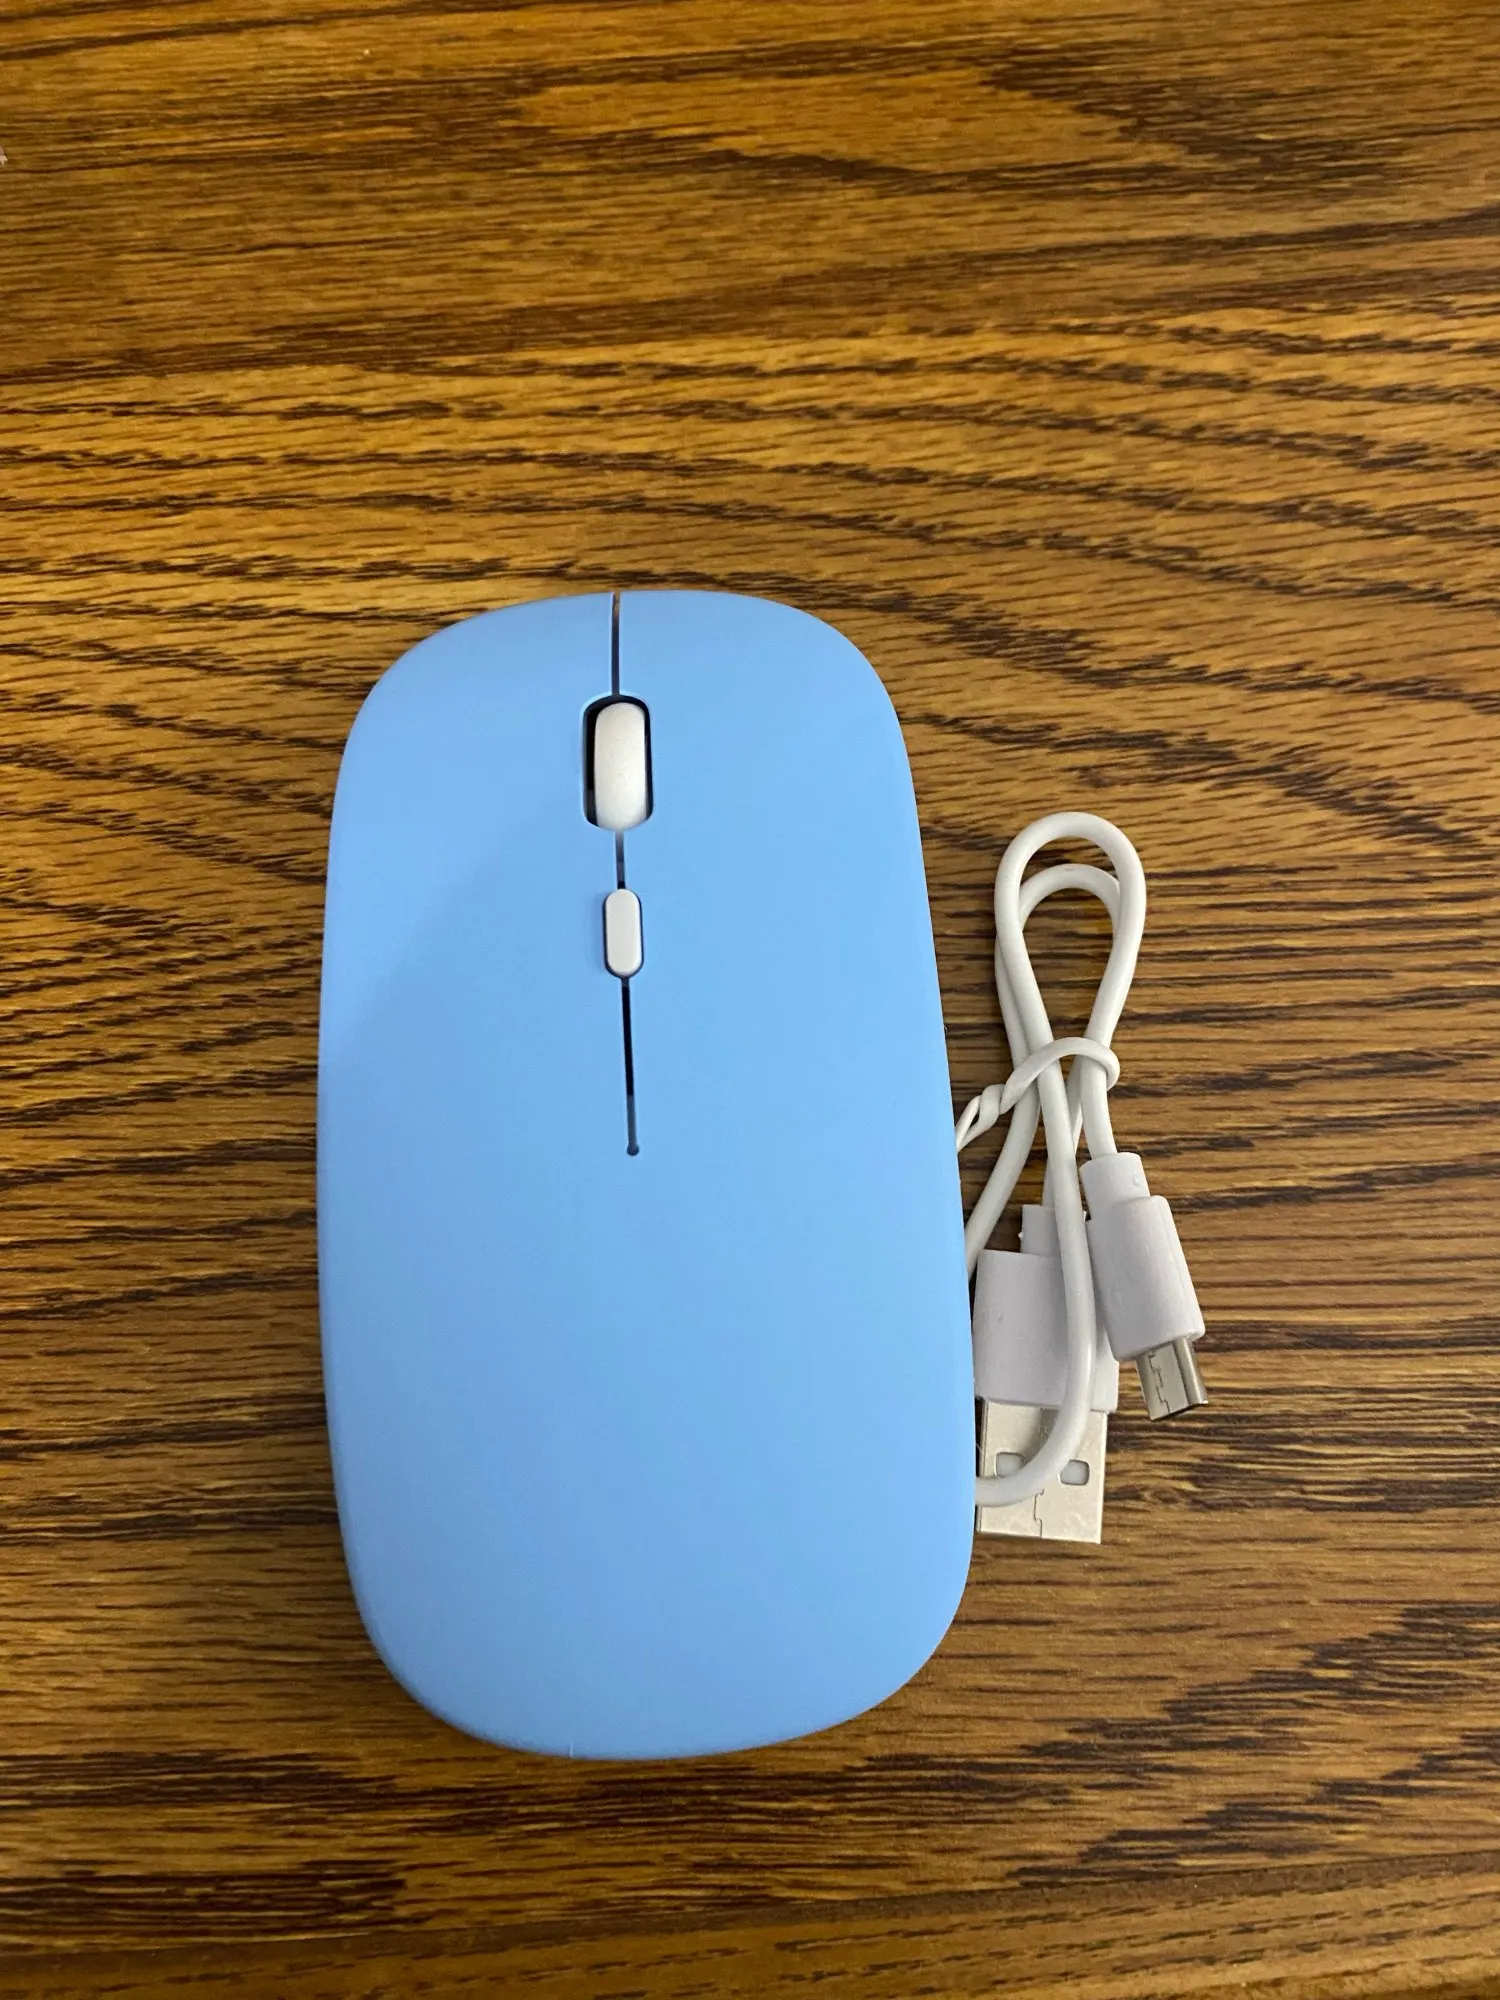 Macaron Rechargeable Wireless Bluetooth Mouse 2.4G